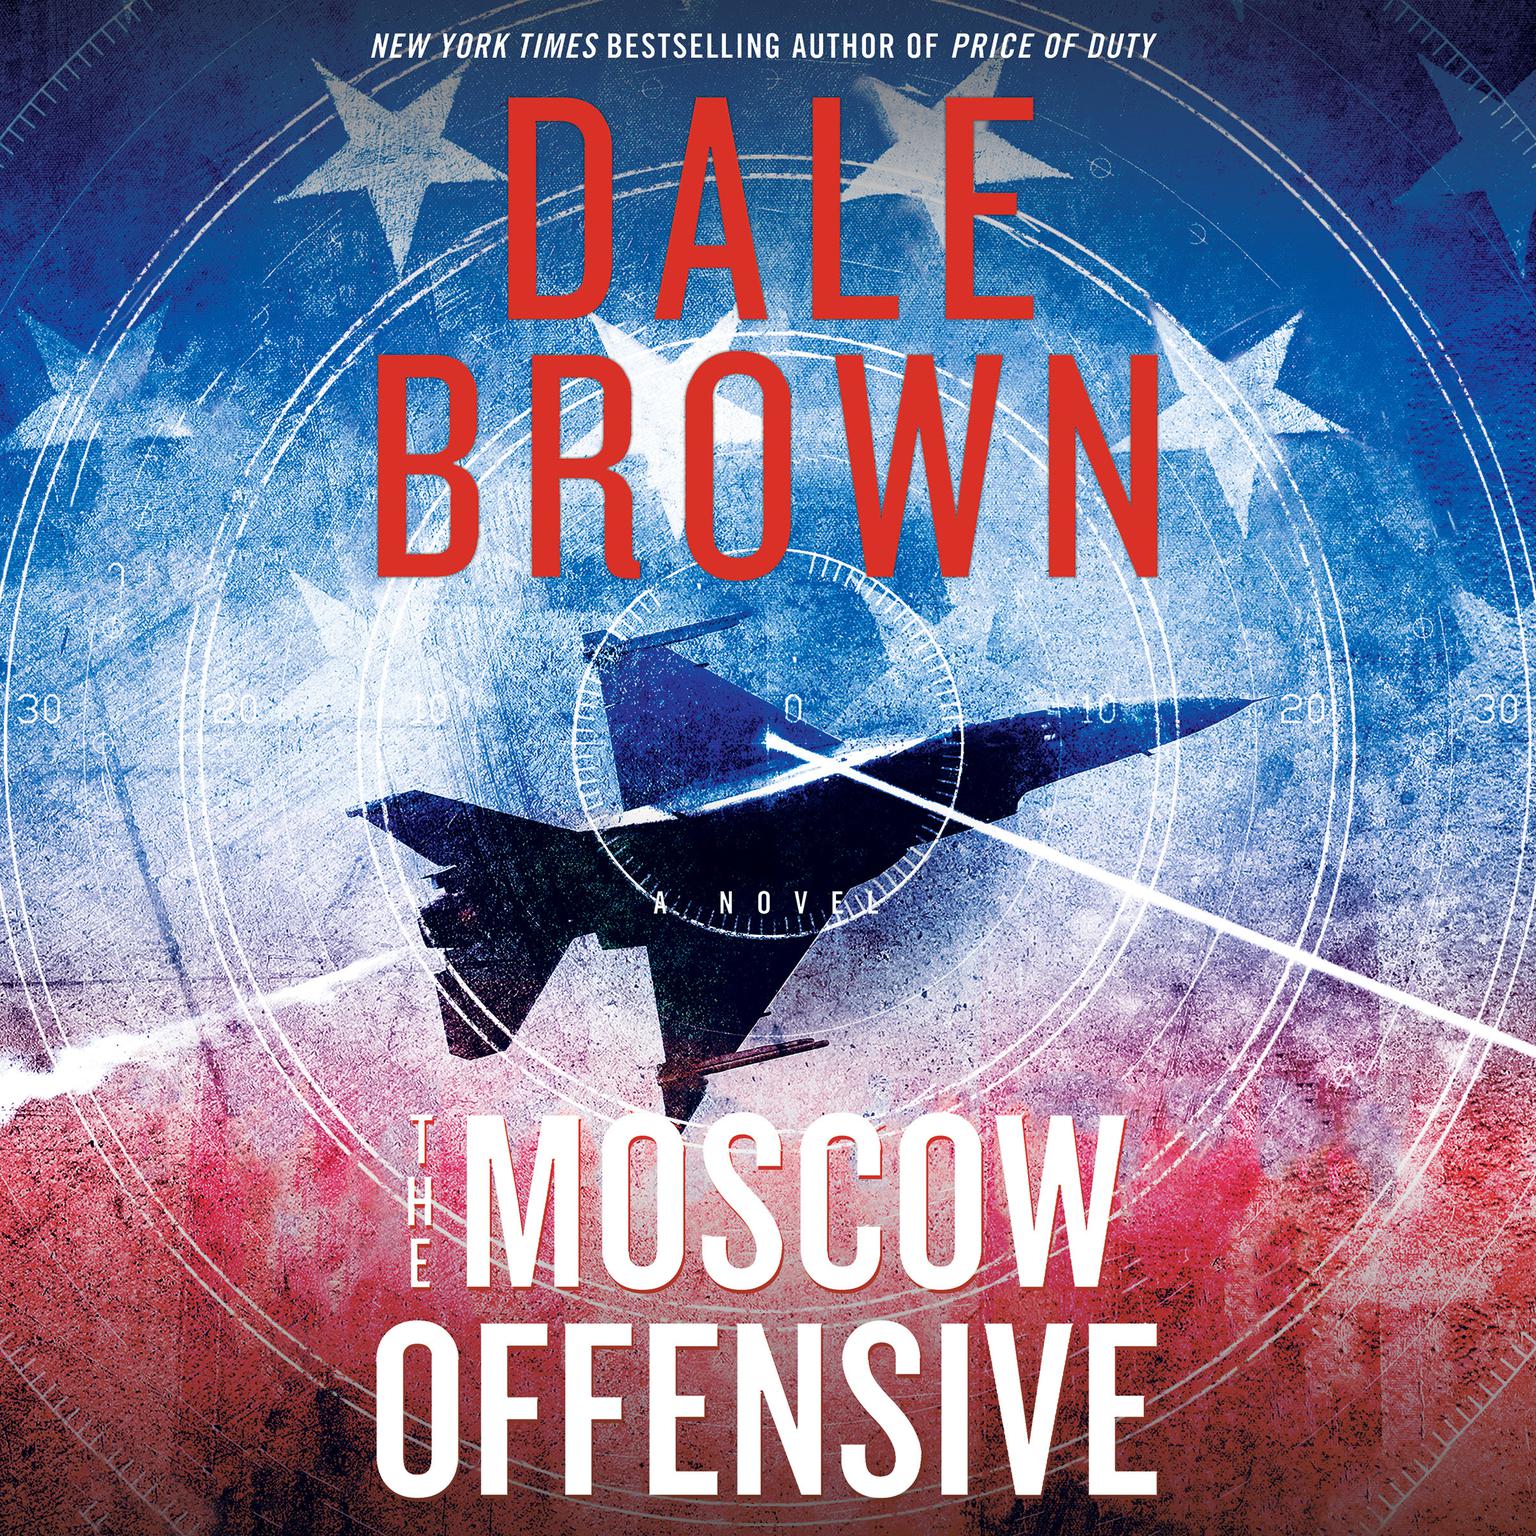 The Moscow Offensive: A Novel Audiobook, by Dale Brown